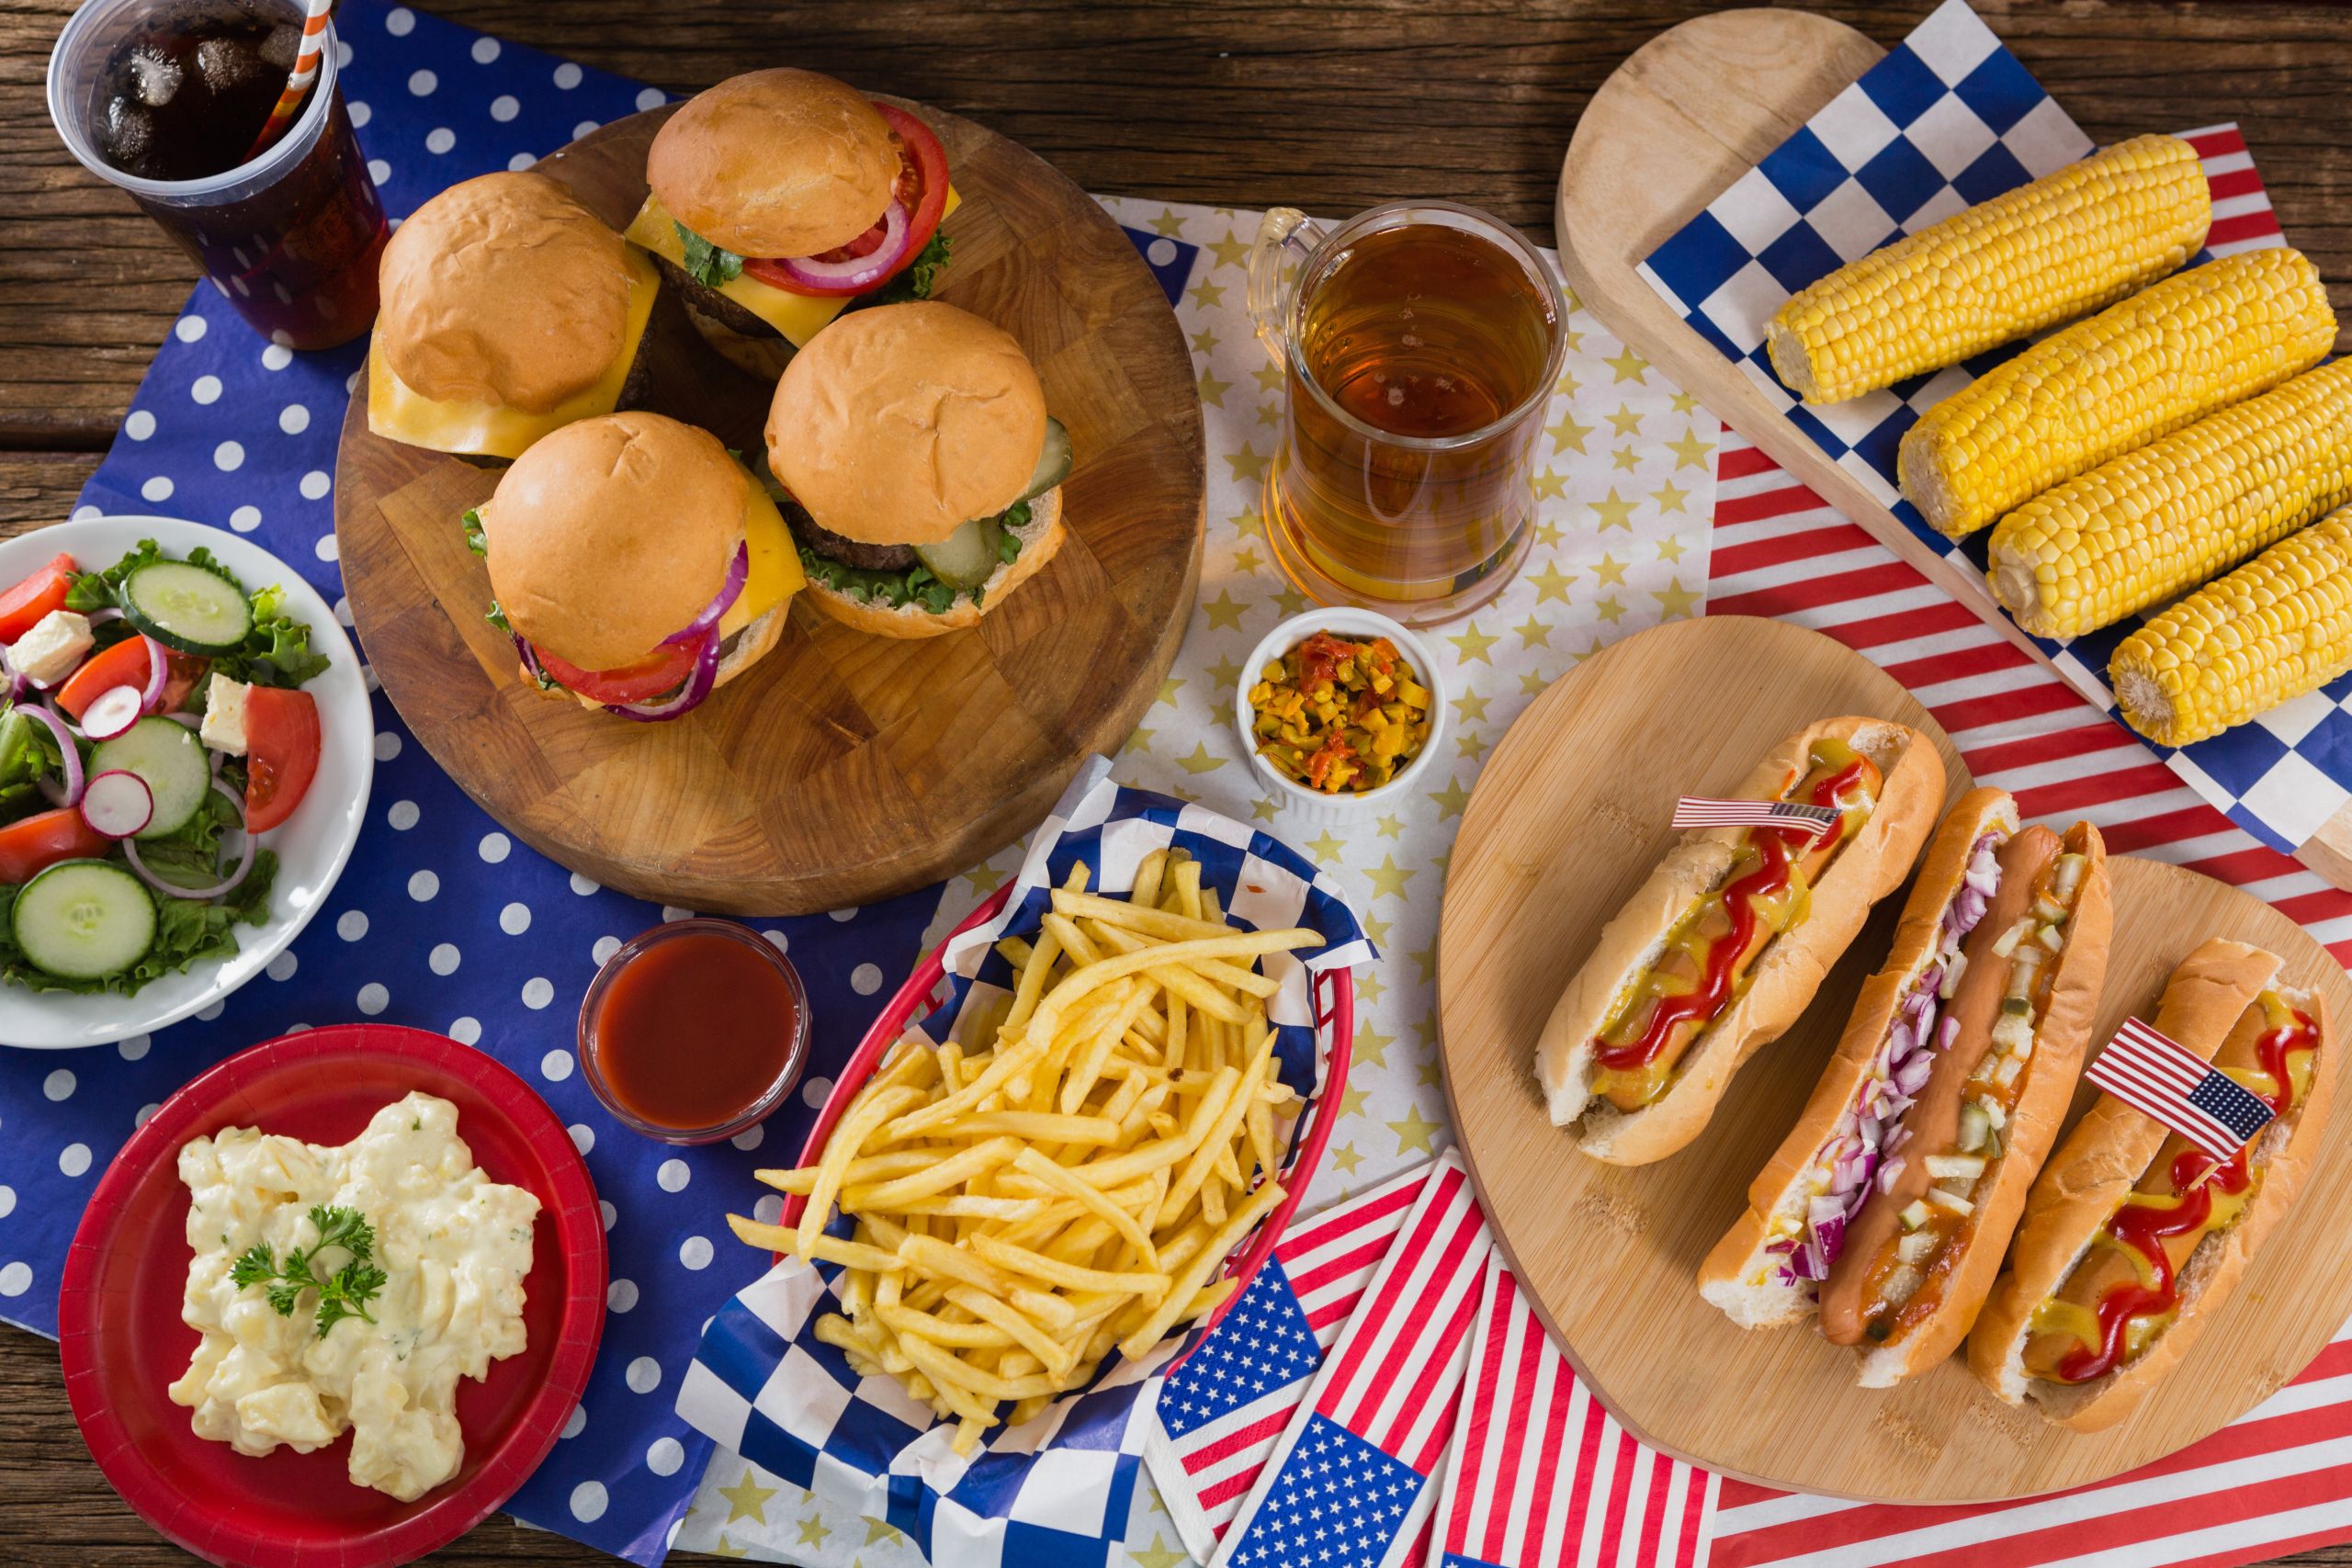 4Th Of July Hot Dogs
 Close up of hot dogs and burgers on wooden table with 4th